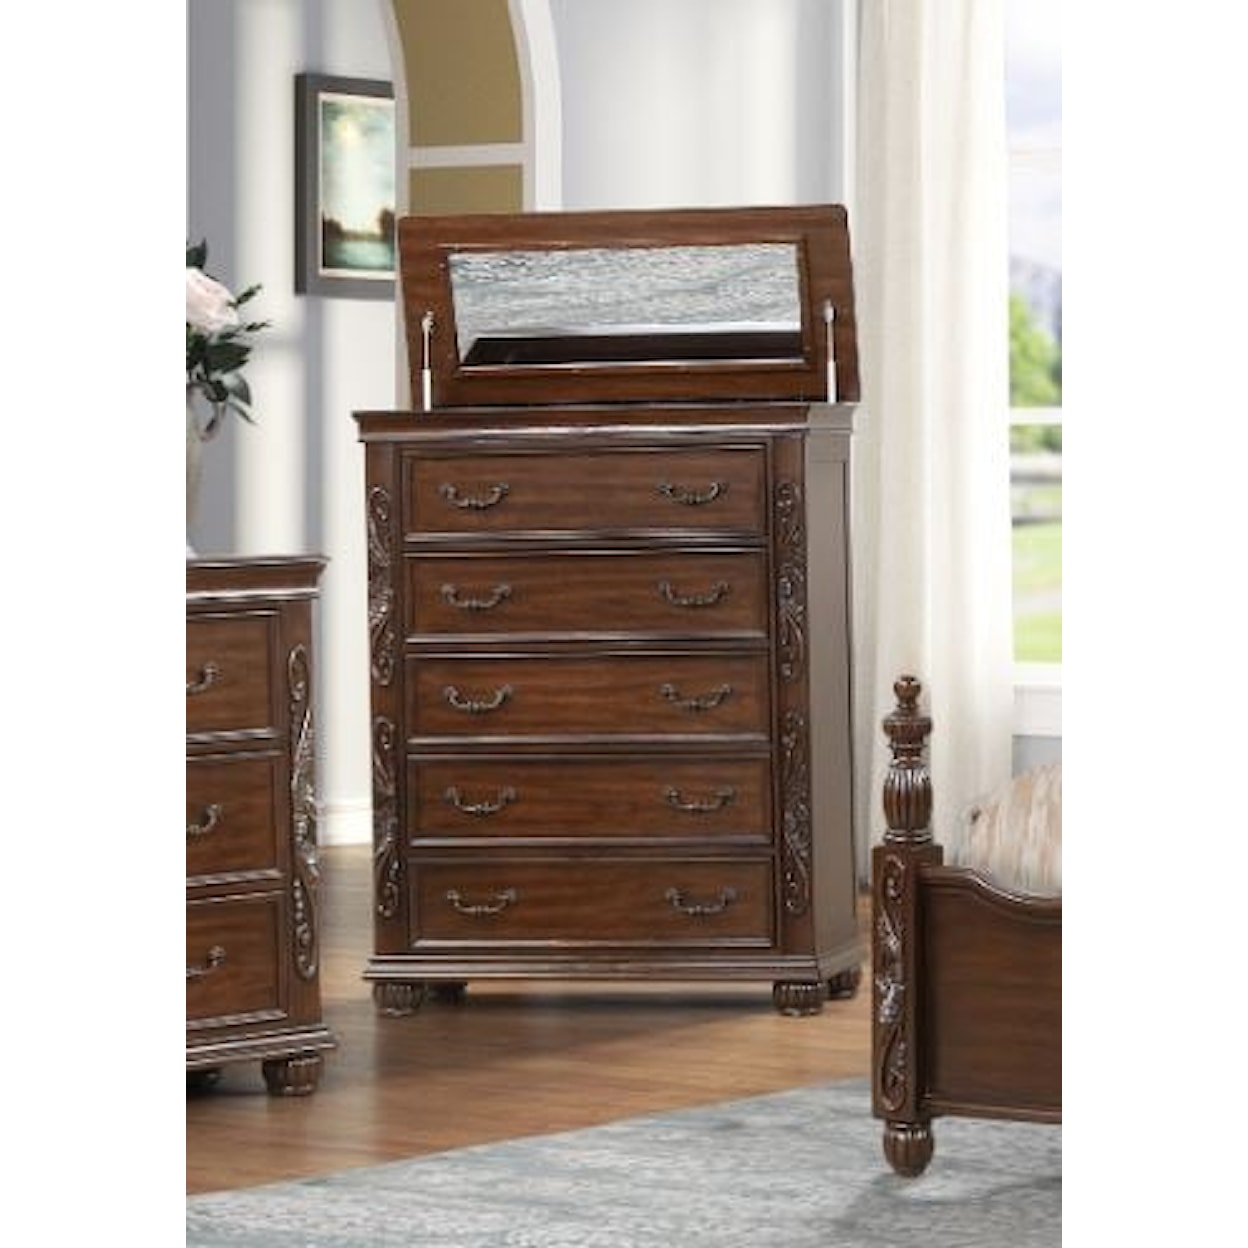 New Classic Furniture Vienna Lift-Top Chest